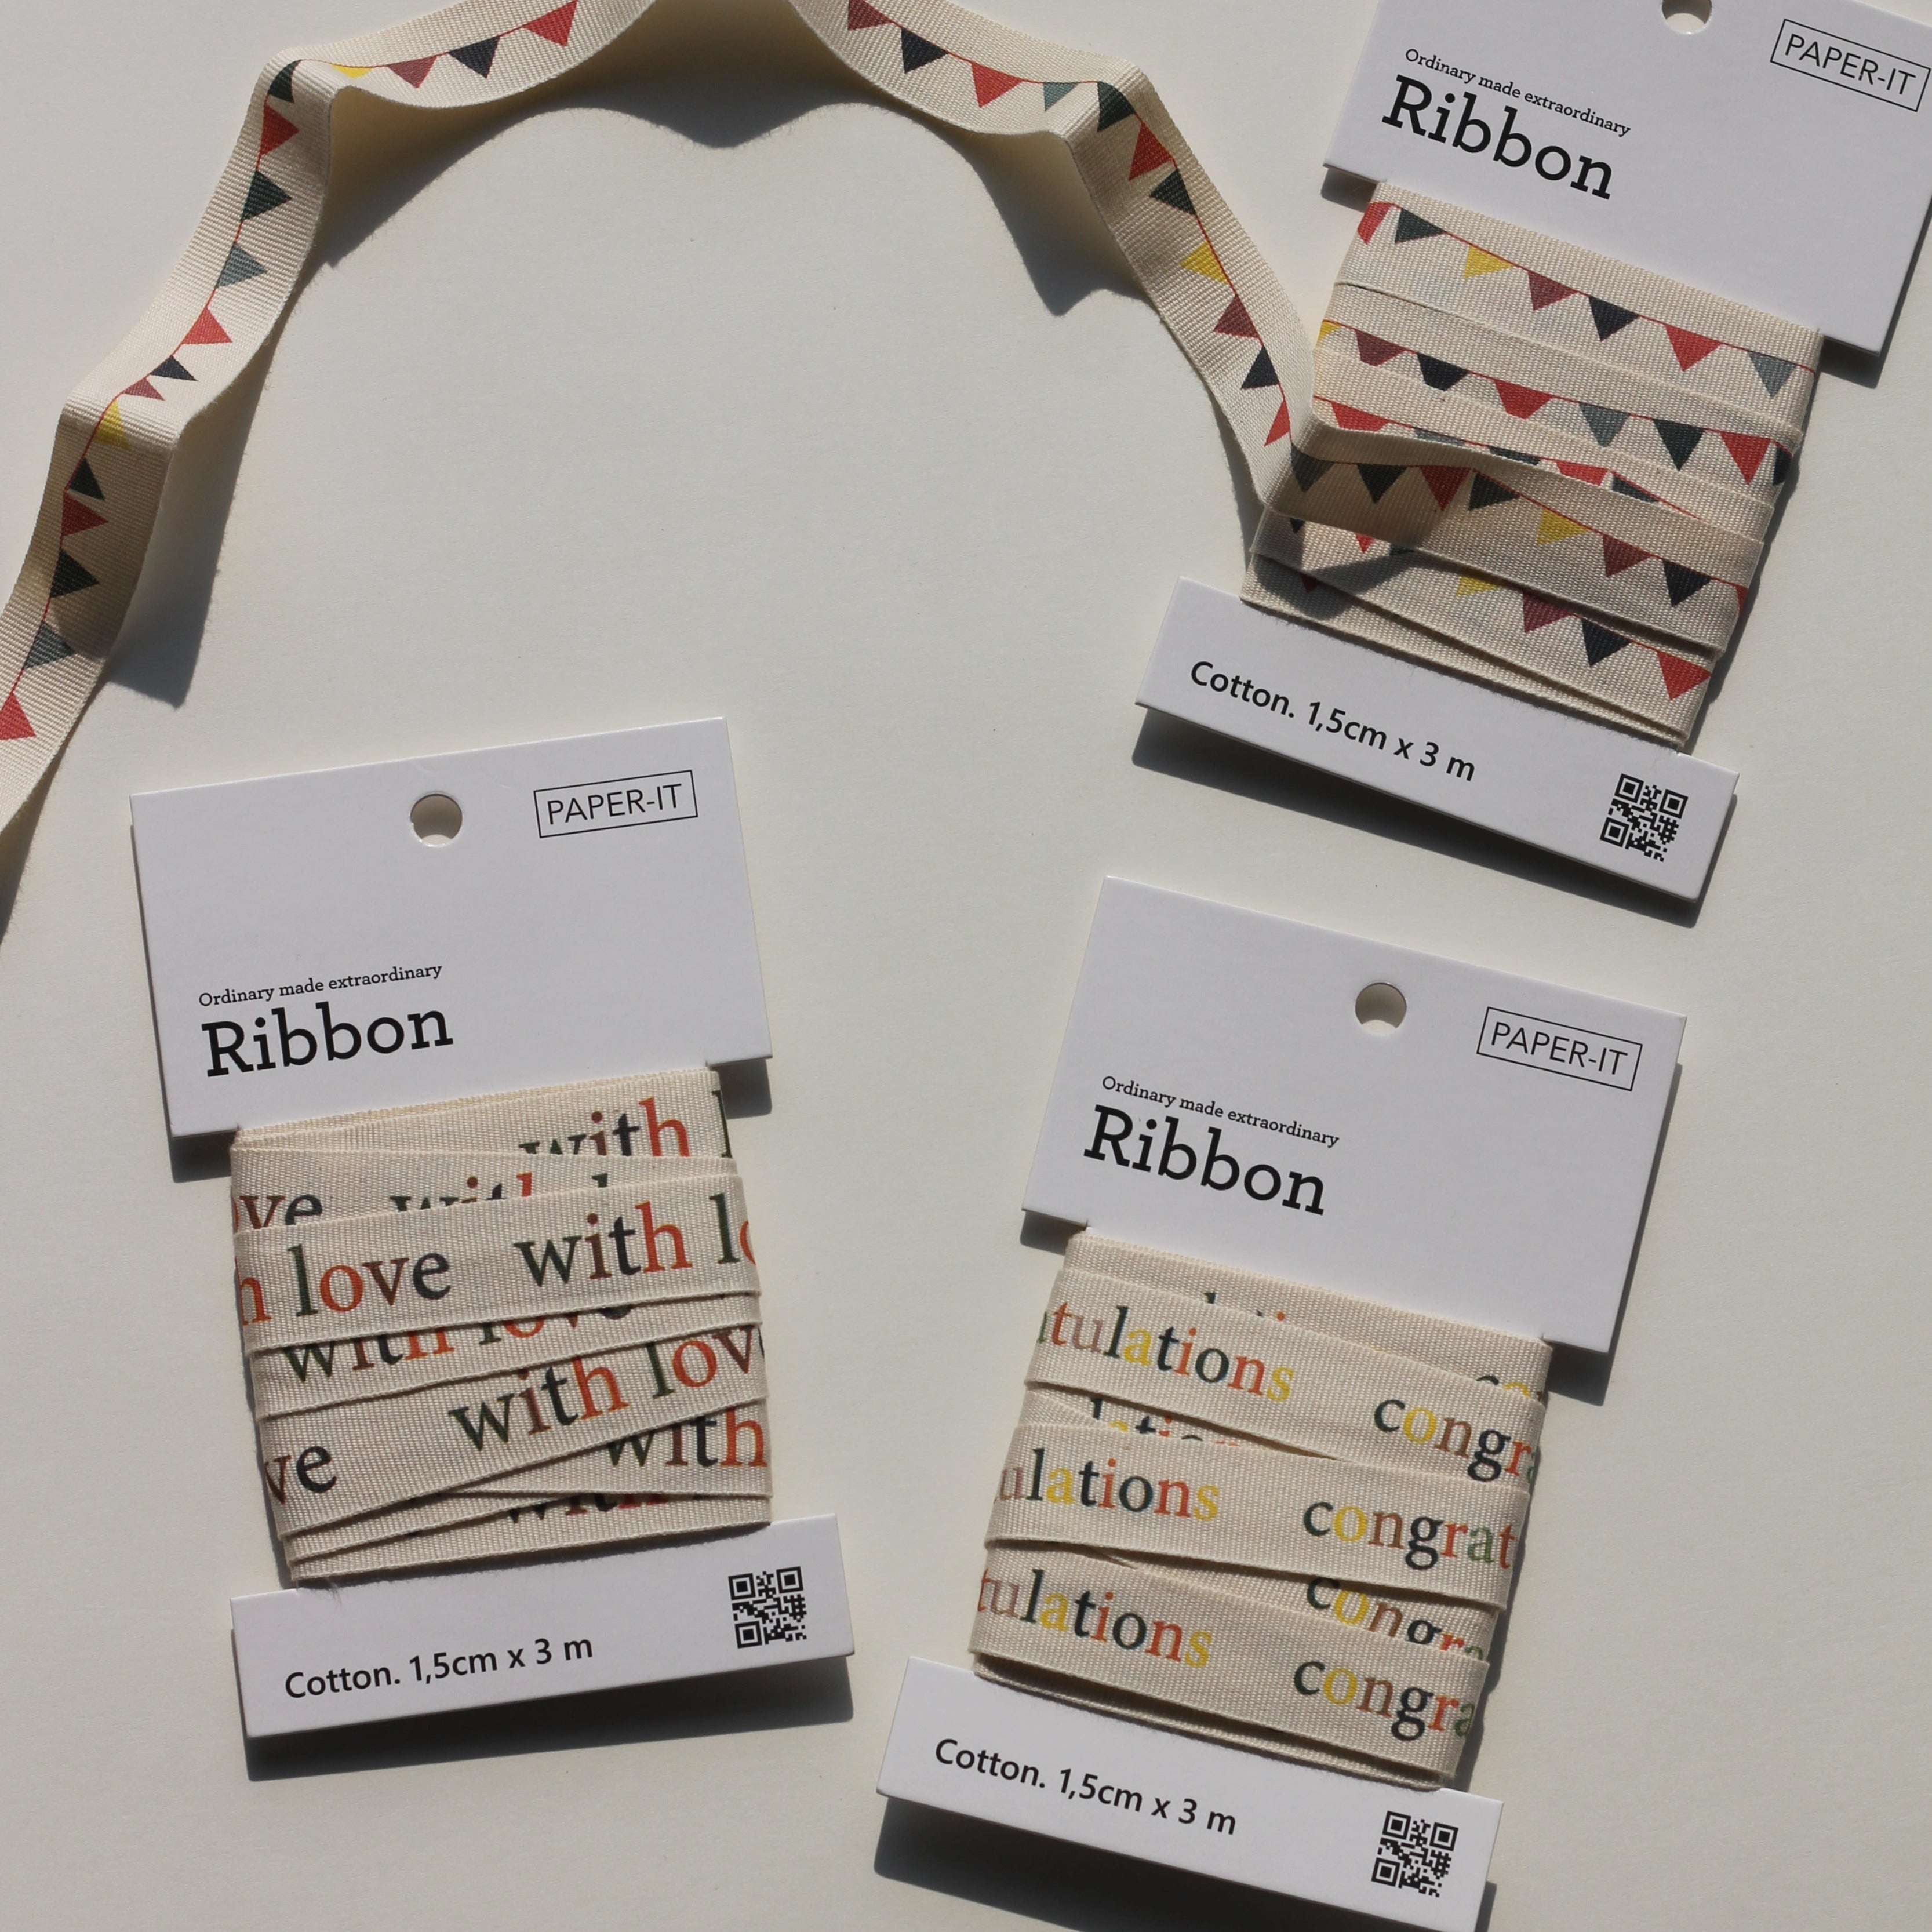 With love + congratulations + bunting cotton ribbons (3 metre) set of 3